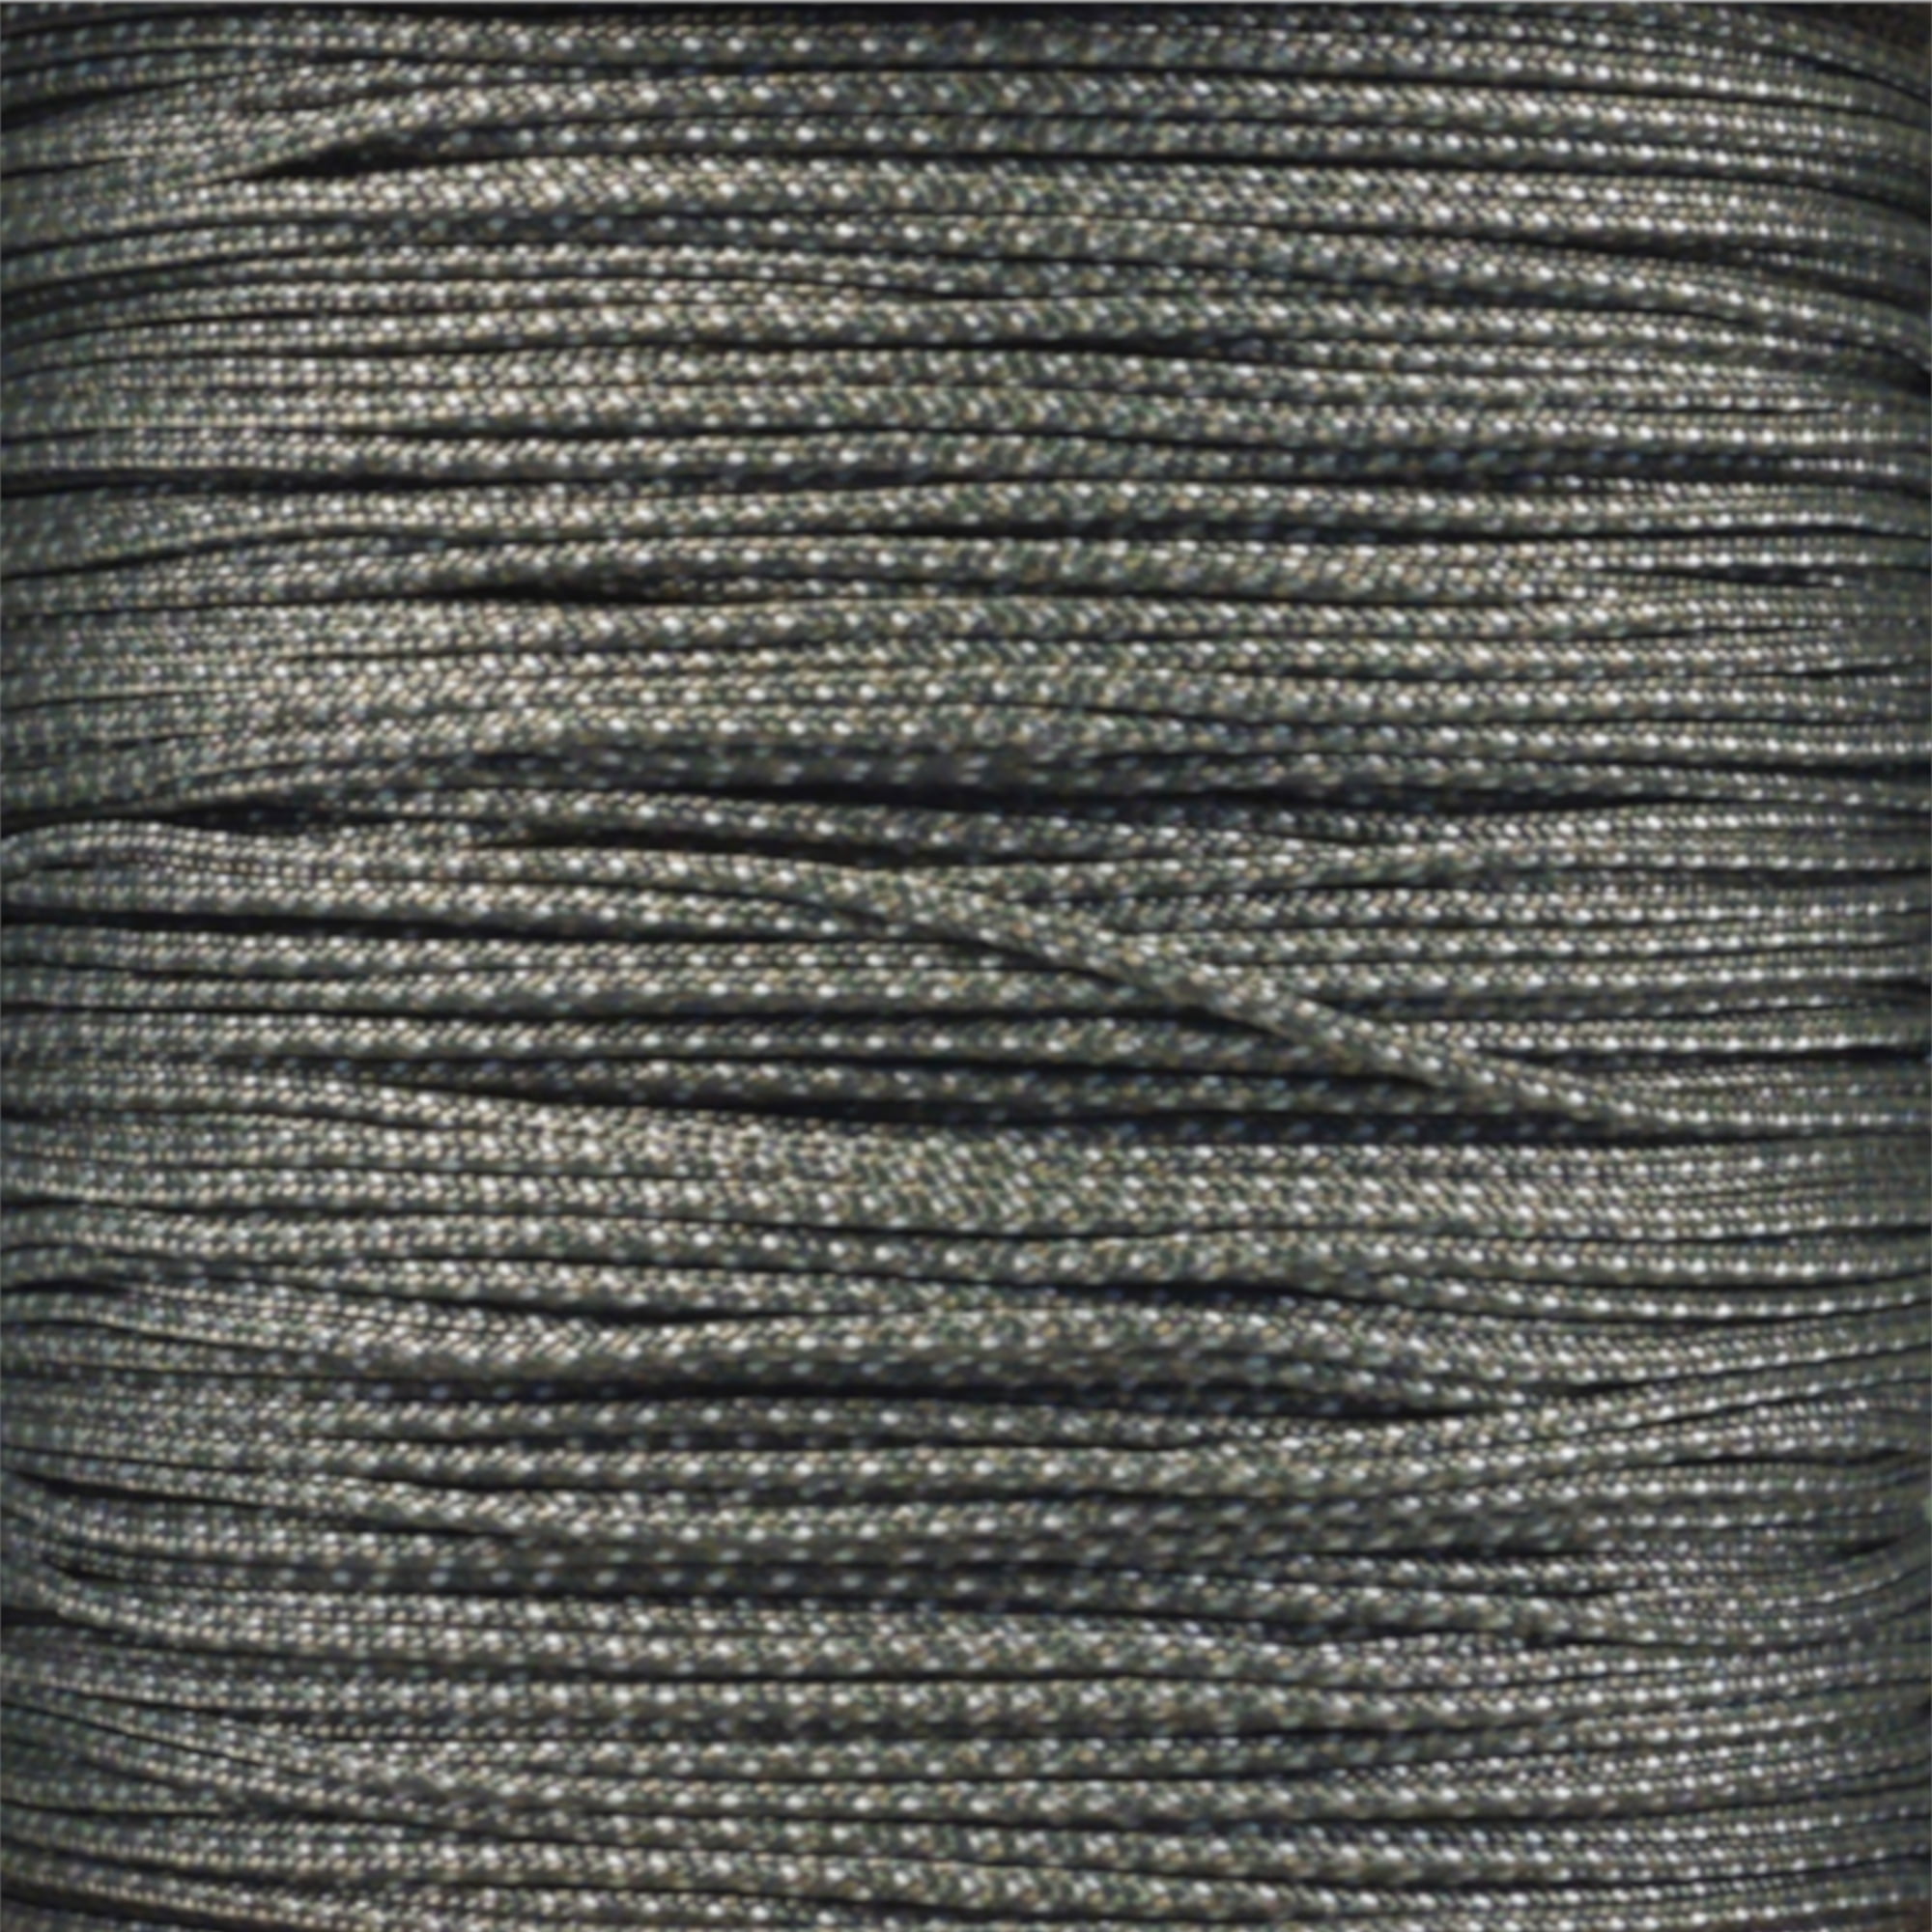 550 275 325 Available in Lengths of 10 50 425 750 and 250 Feet of USA Made Cord Various Solid Colors and para-Max Paracord 100 PARACORD PLANET 95 25